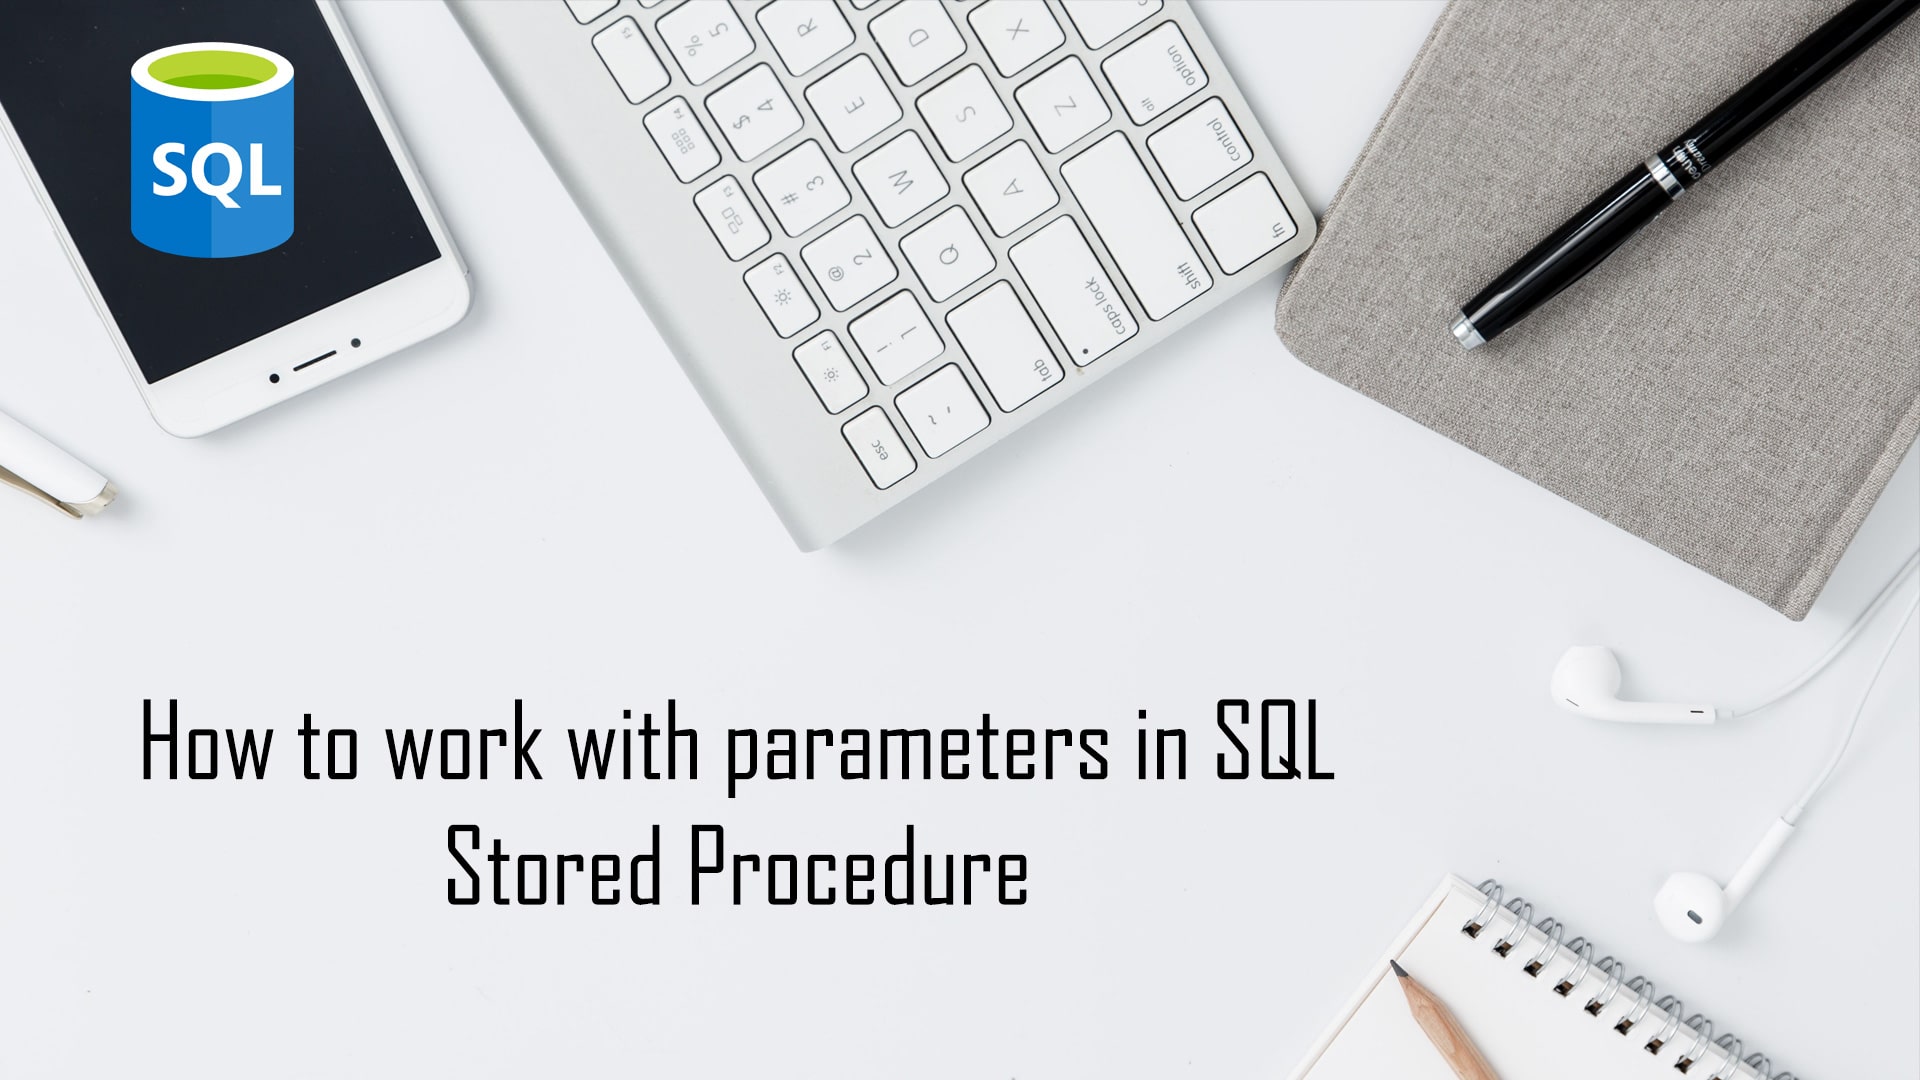 Learn How to Work with Parameters in SQL- Stored Procedure